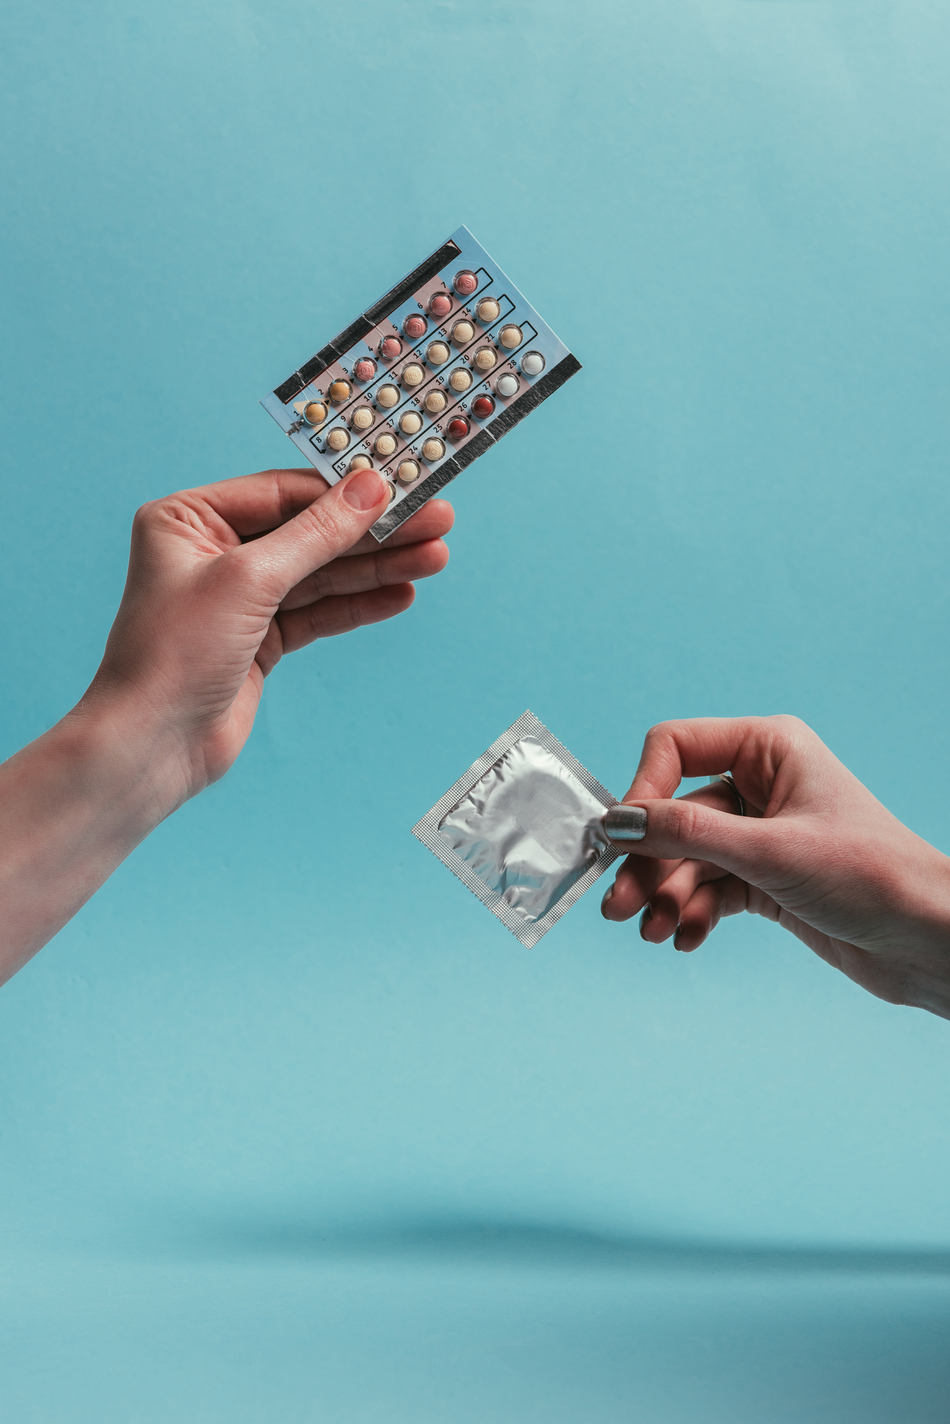 Birth Control Options for University Students